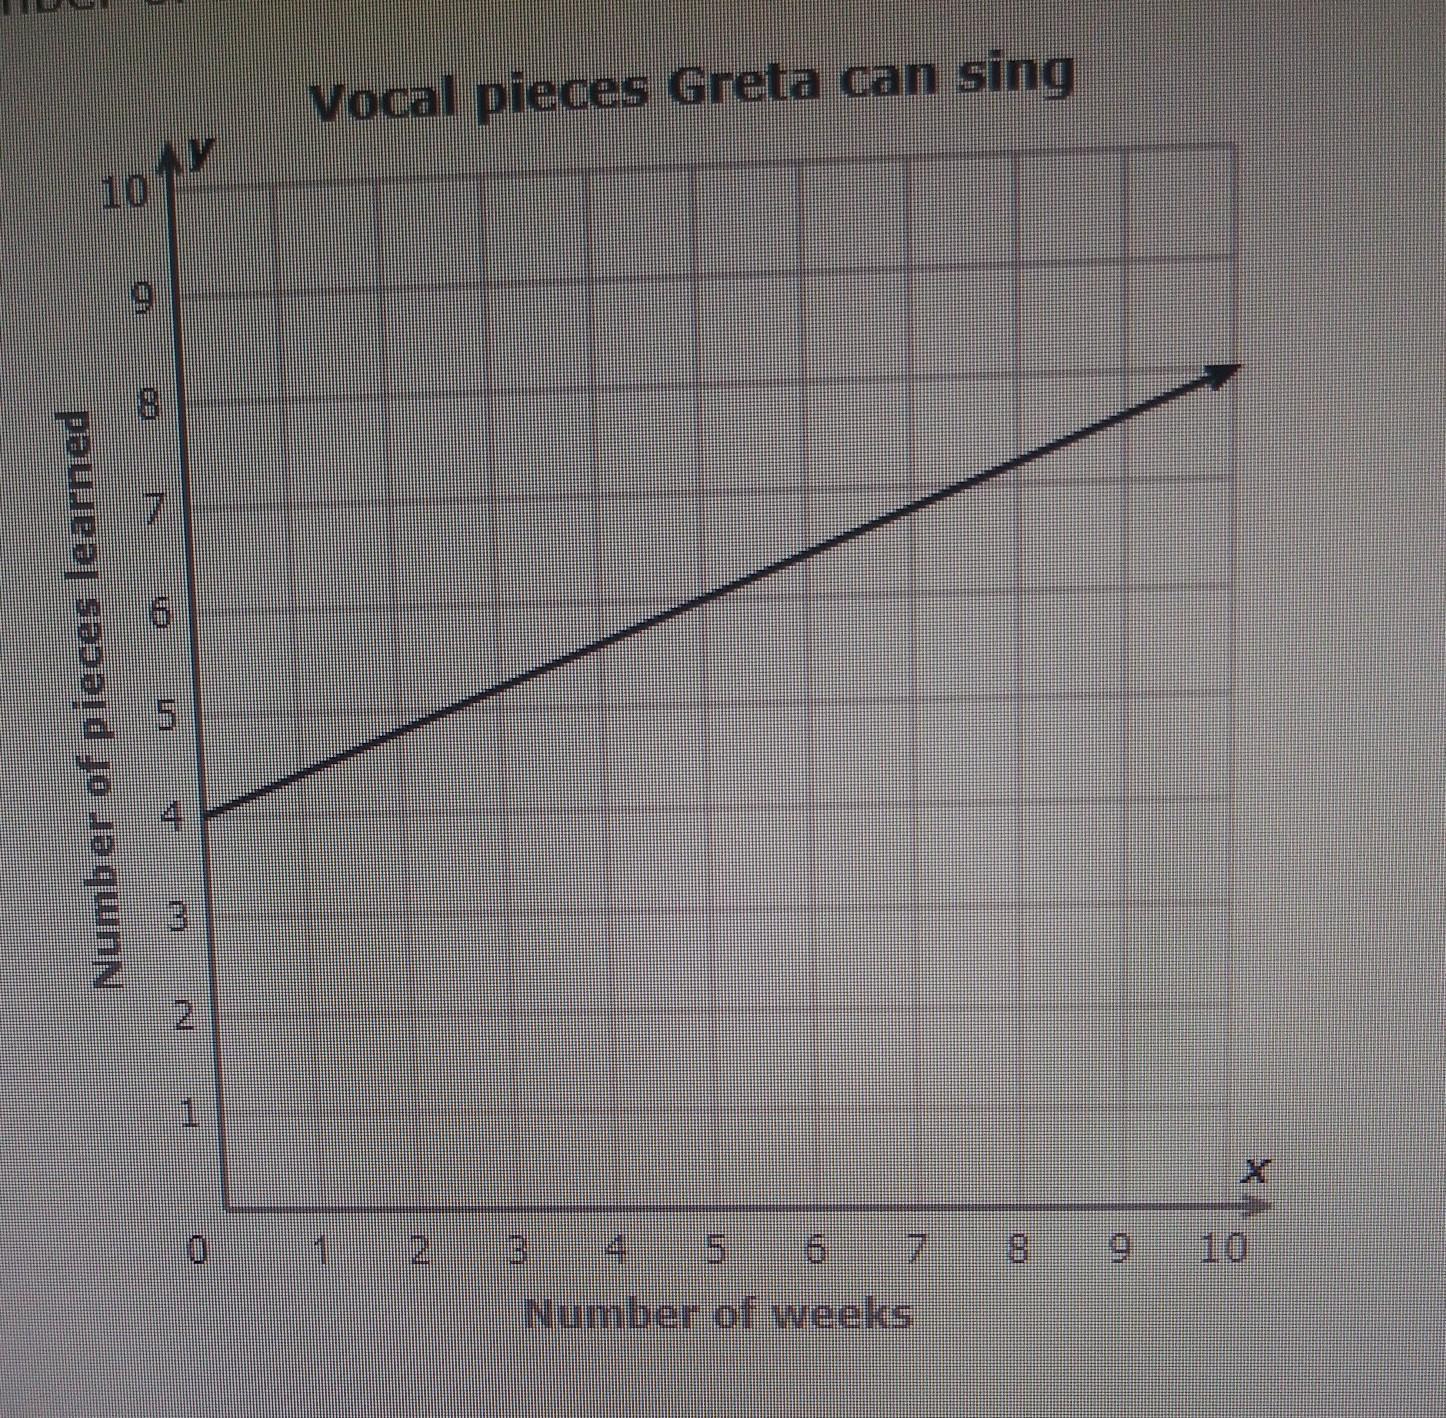 This Graph ( Below ) Shows How Thr Total Number Of Pieces Greta Knows How To Sing Depends On The Number